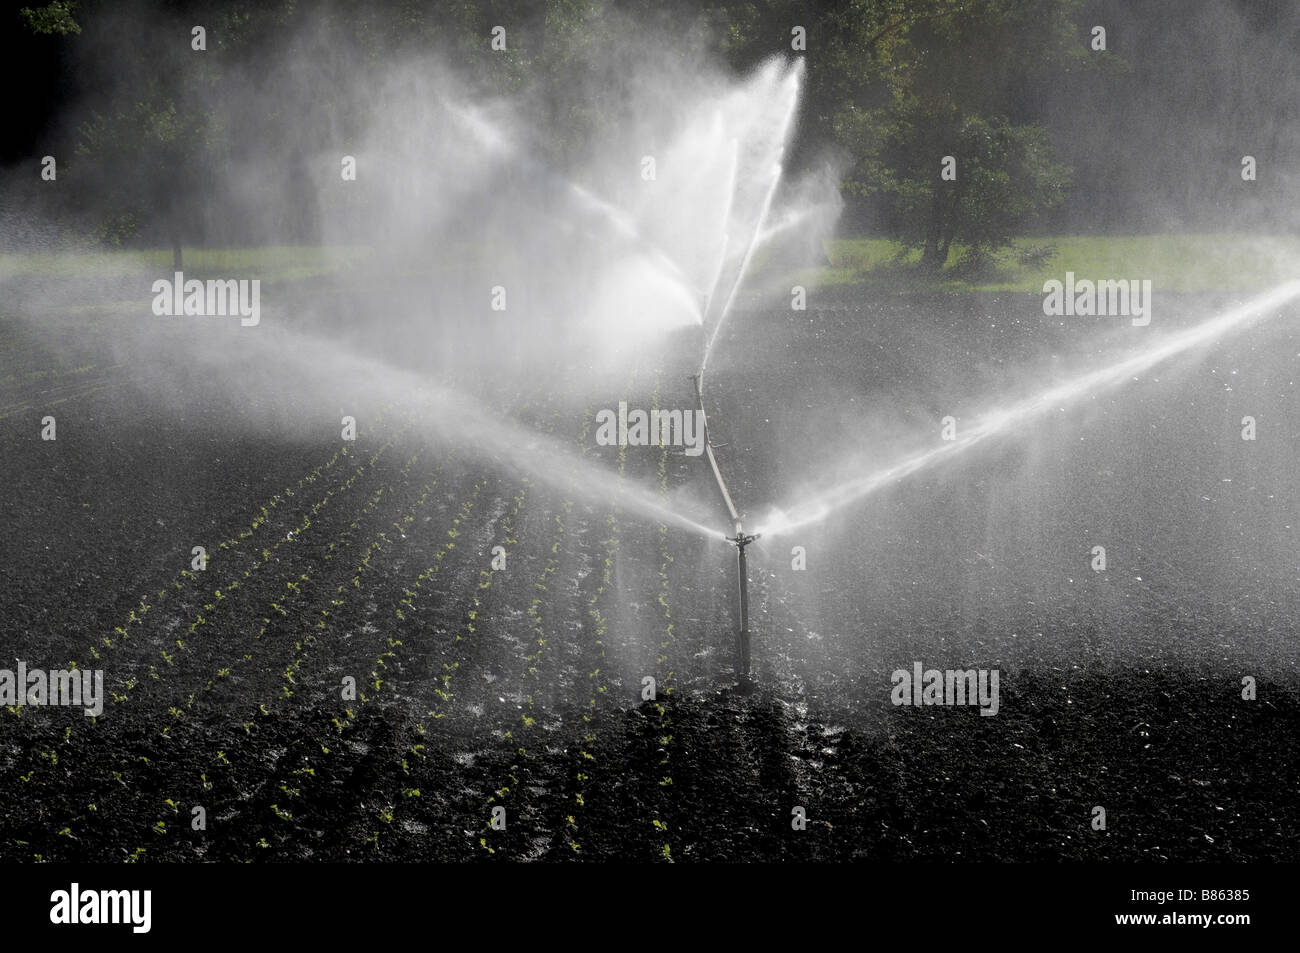 Automatic system watering a field Stock Photo